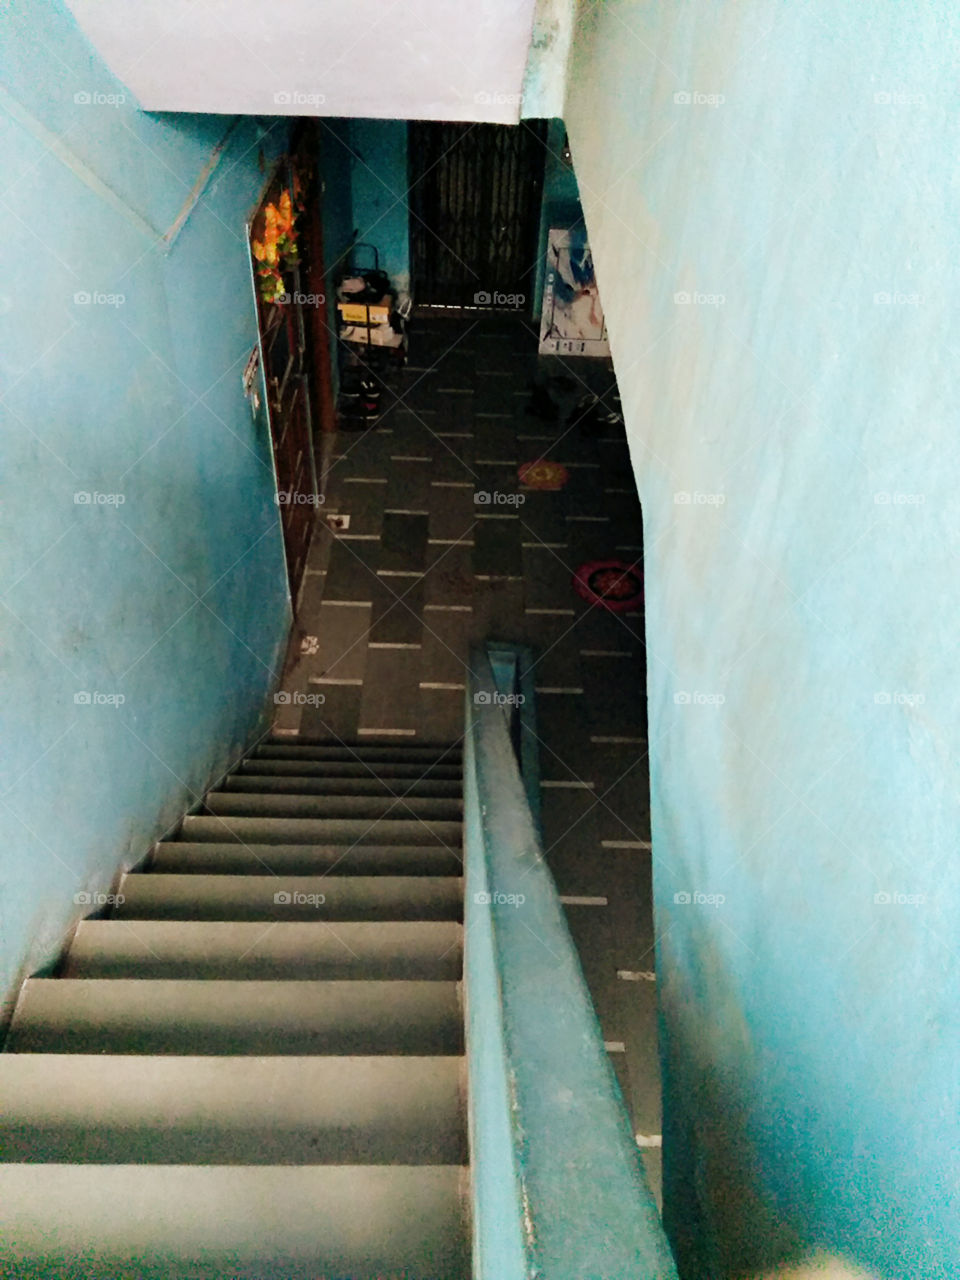 STAIRS OF LIFE